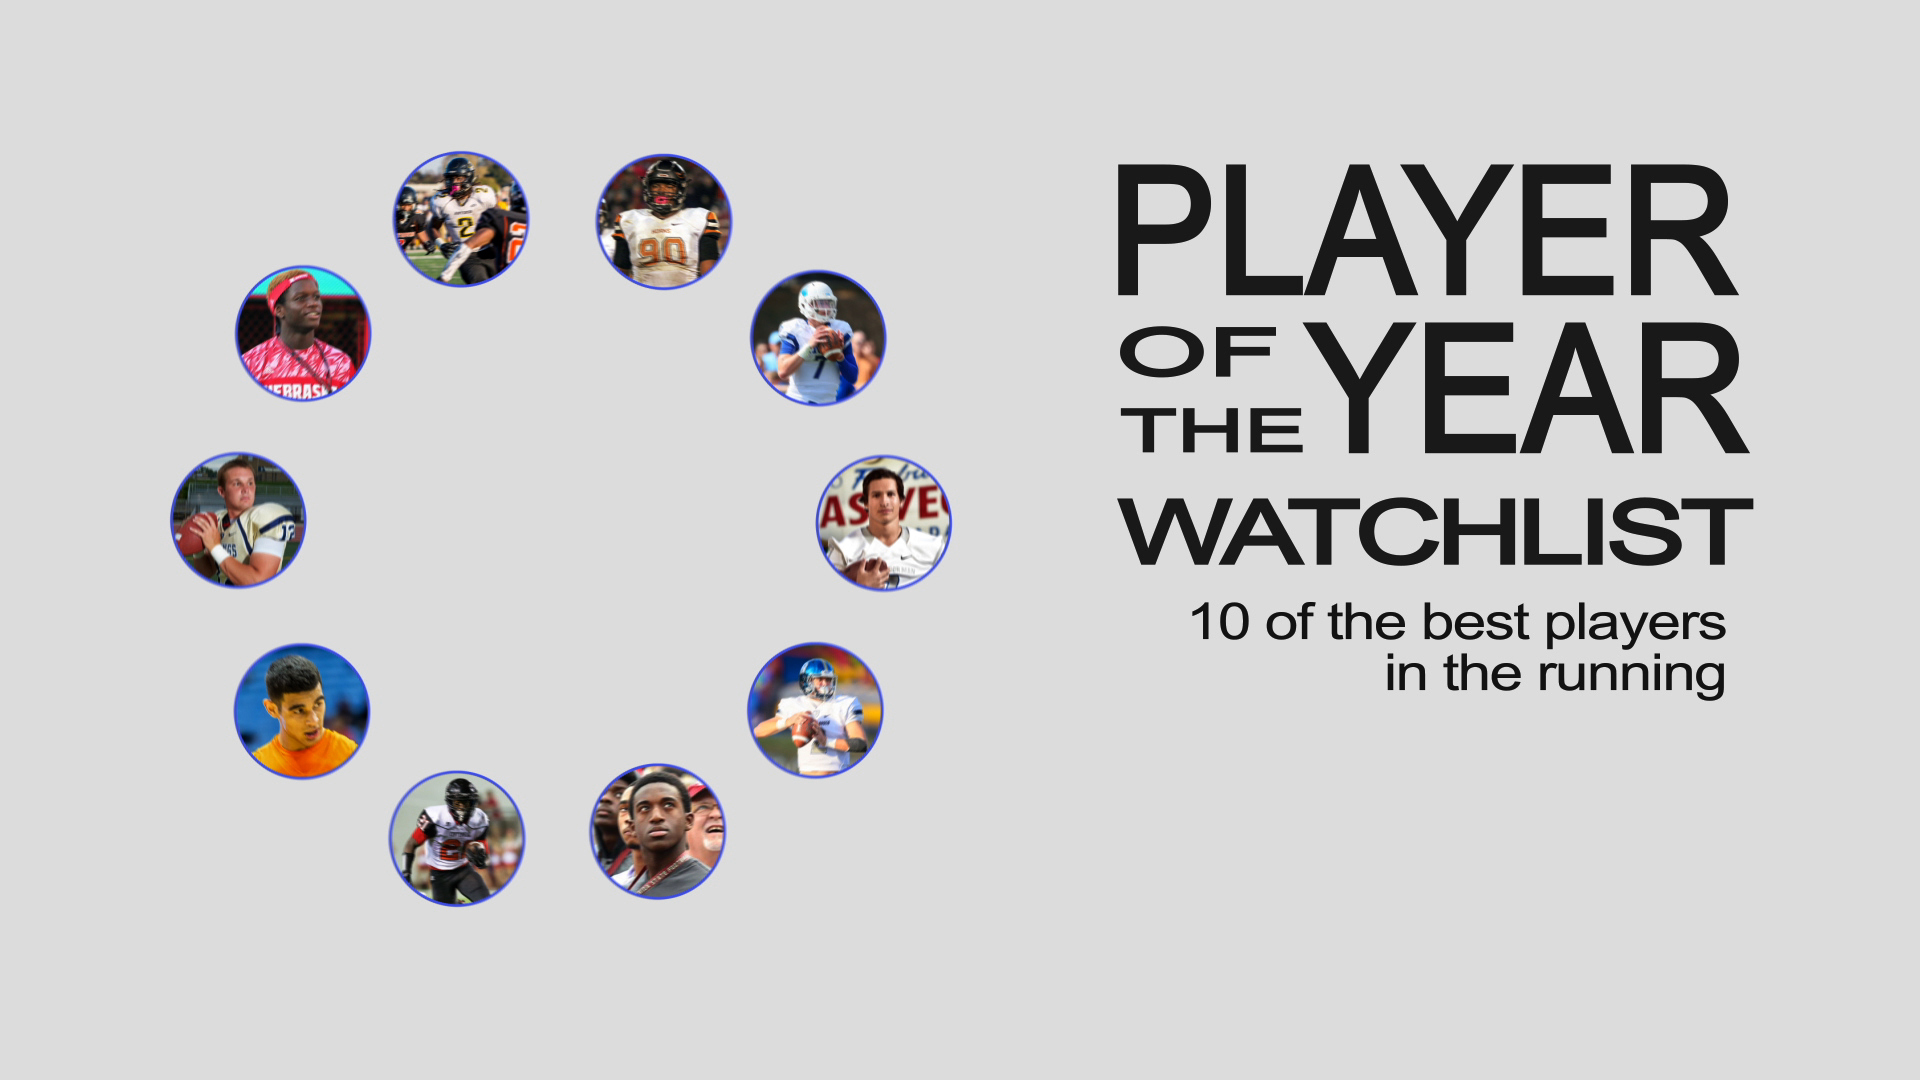 Player of the Year Watch List 2015